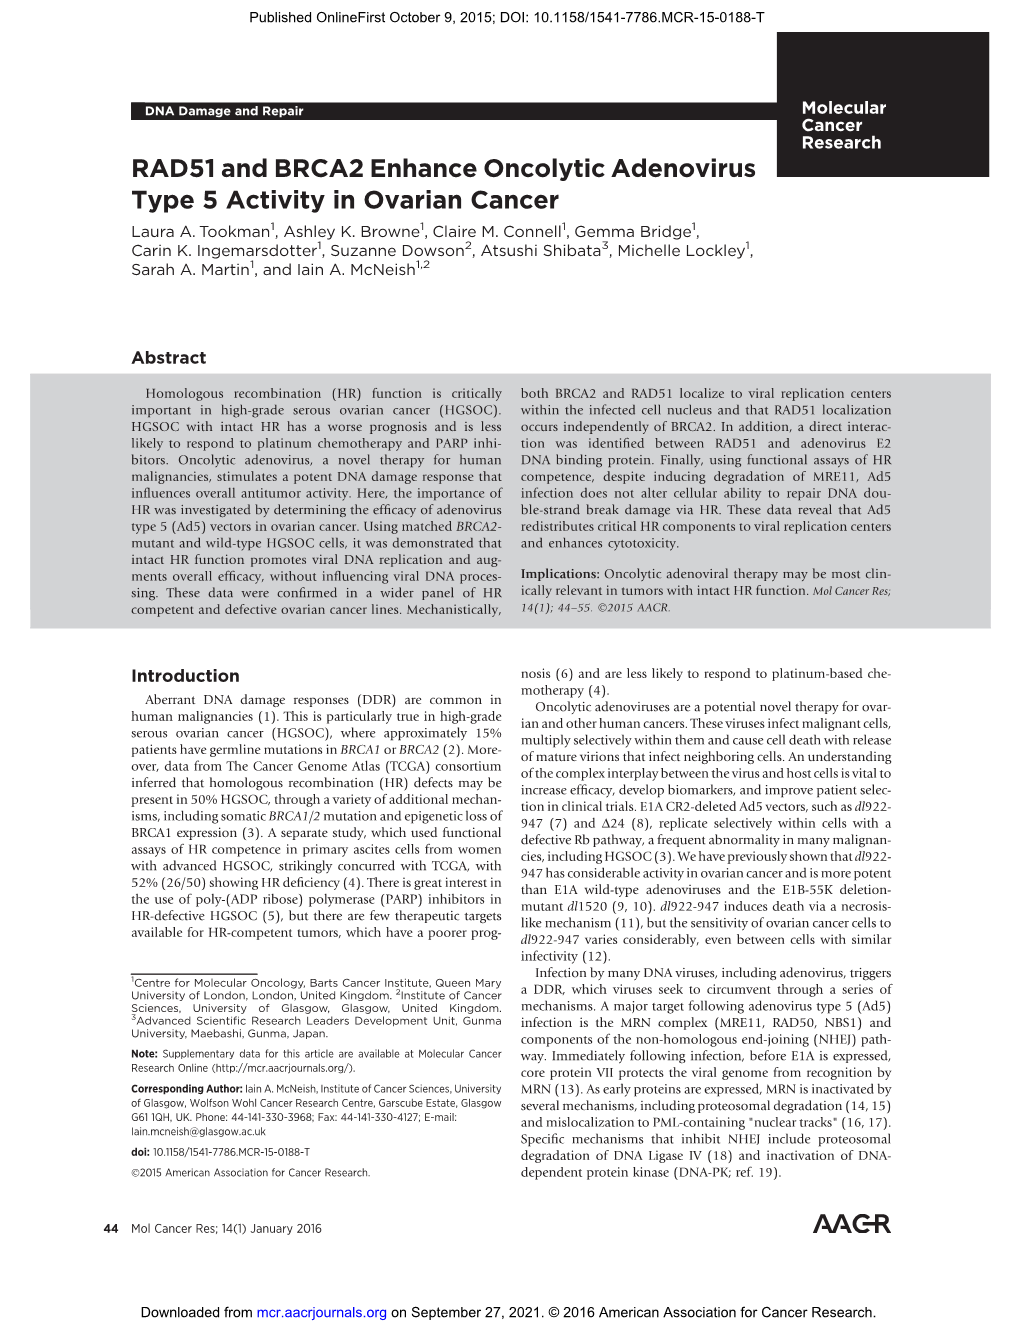 RAD51 and BRCA2 Enhance Oncolytic Adenovirus Type 5 Activity in Ovarian Cancer Laura A